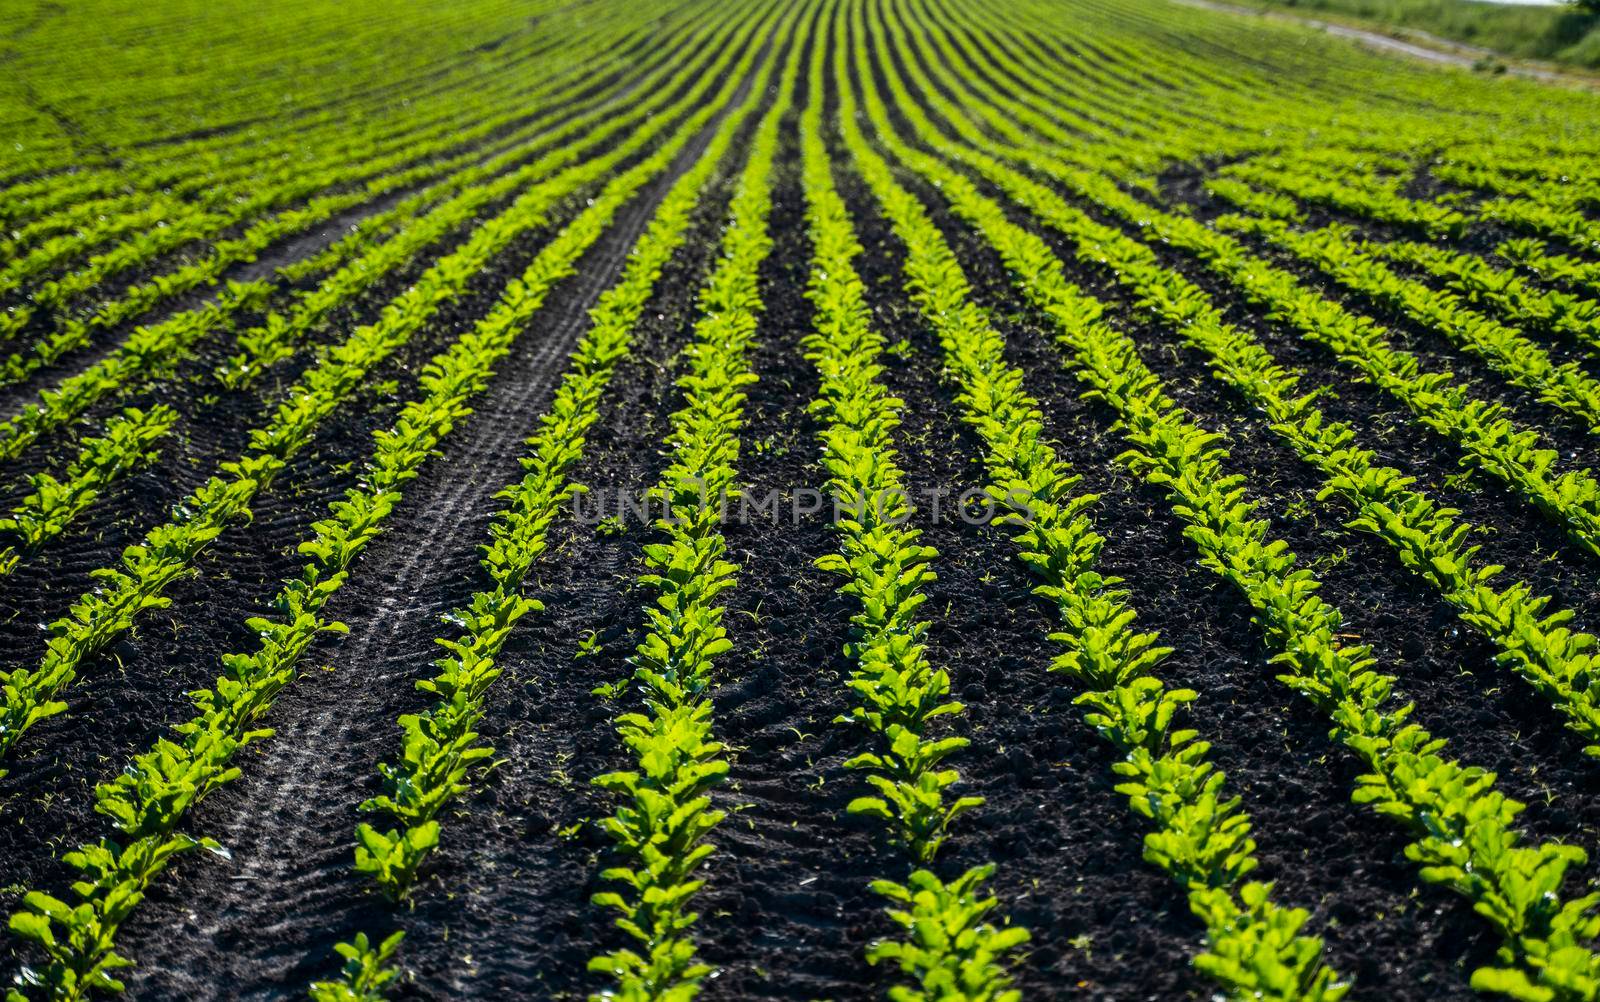 Red beet or sugar beet growing in soil. Fresh green leaves of beetroot. Row of green young beet leaves growth in organic farm. Close-up agricultural beet plantation. by vovsht